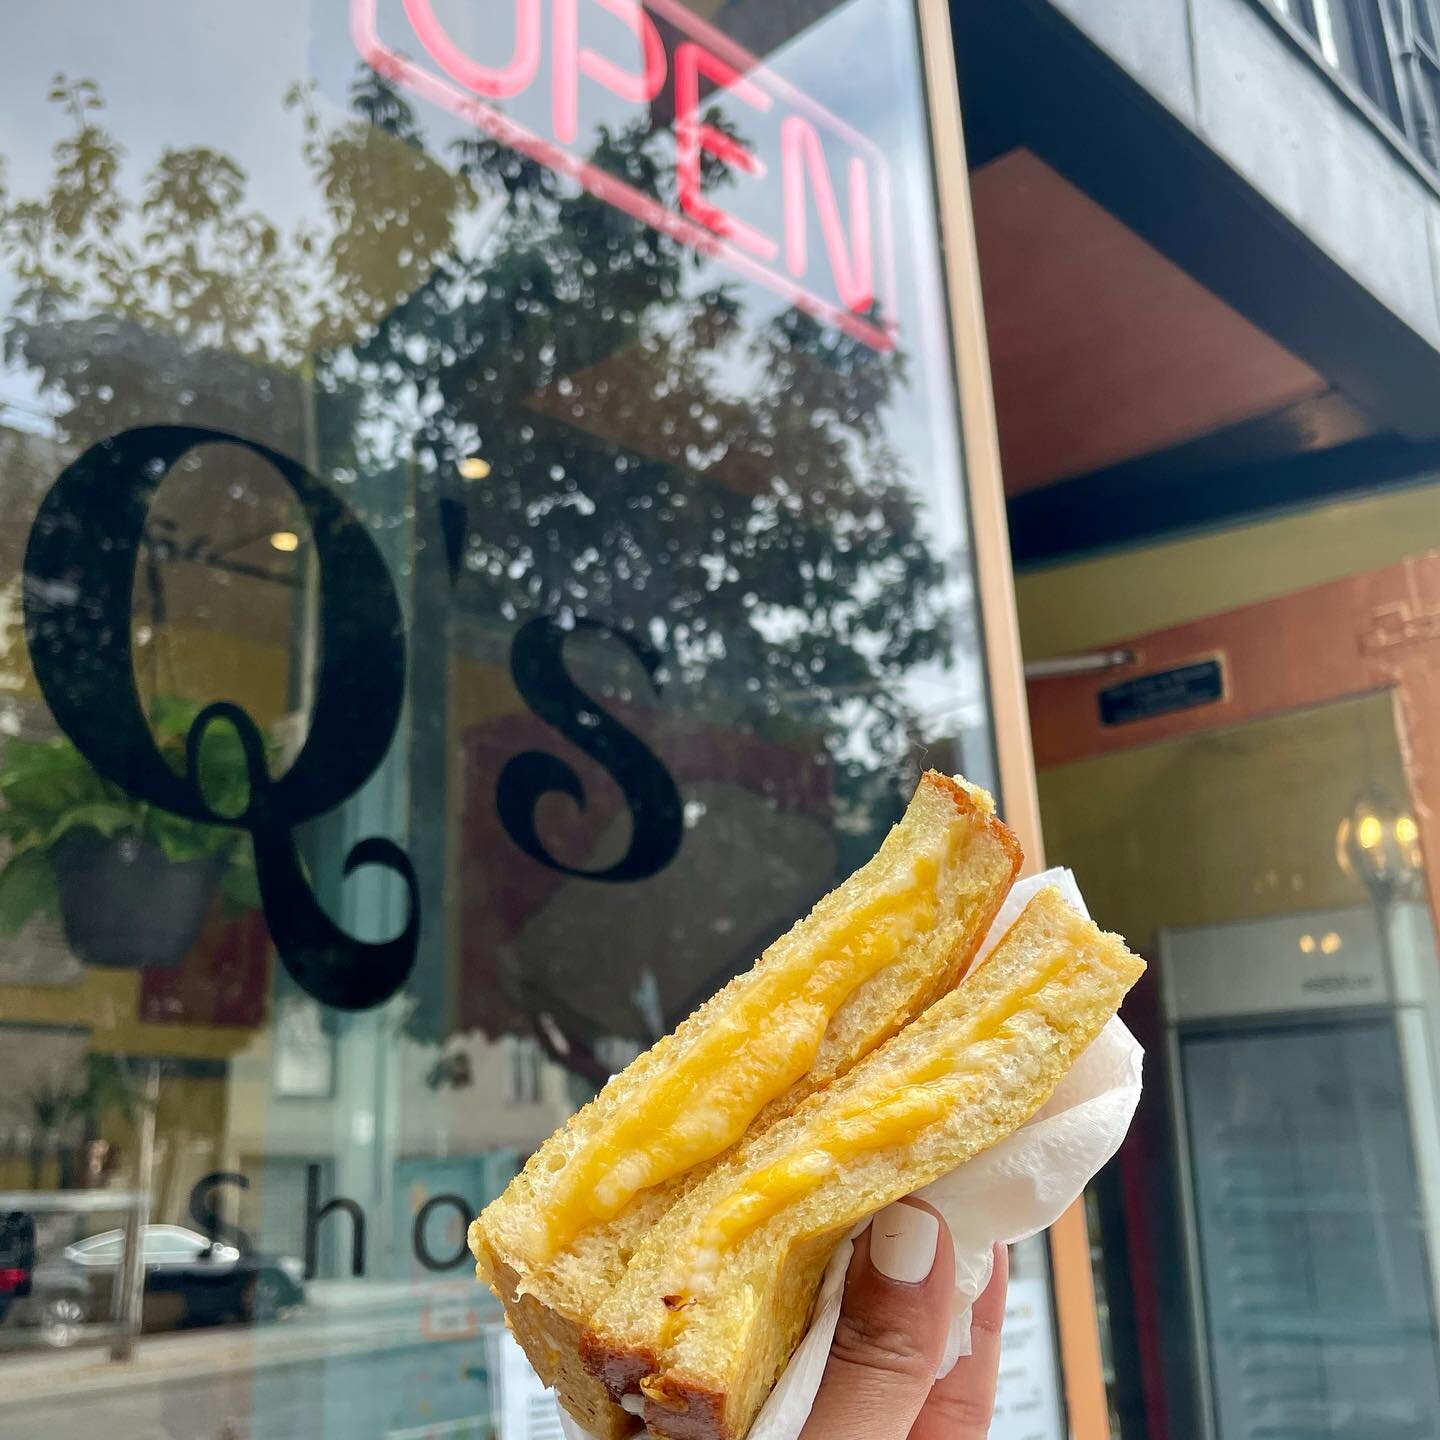 Grilled Cheese is always the answer! #eatsf #grilledcheesesandwich #sffoodscene #sfsandwiches #qssandwichshop #sfeater